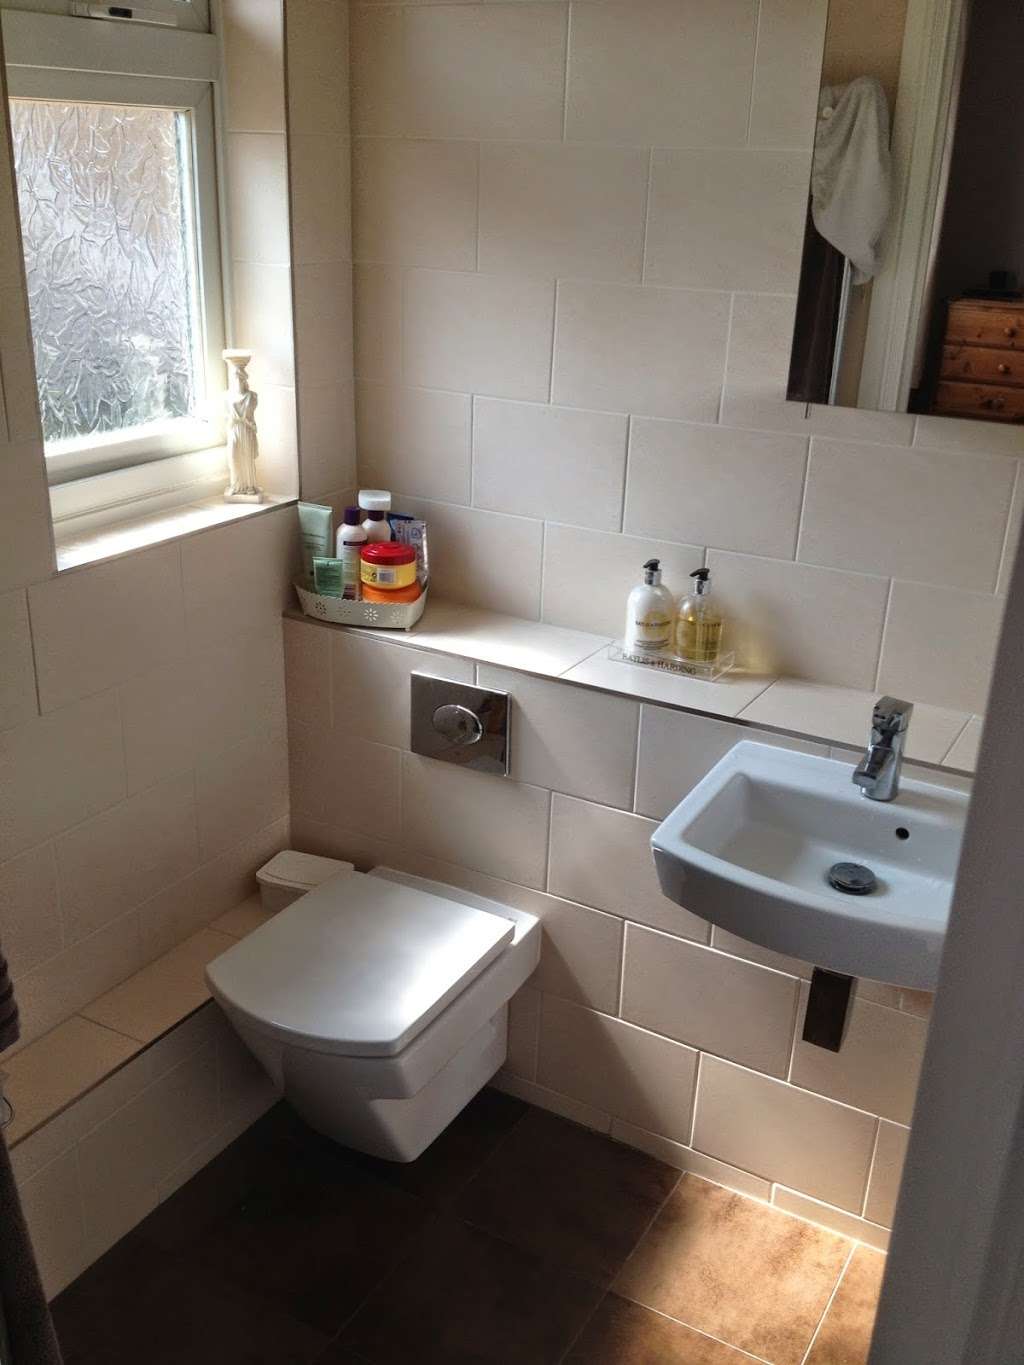 The Works Plumbing Services | 9 Glenwood, Dorking RH5 4BY, UK | Phone: 01306 302015